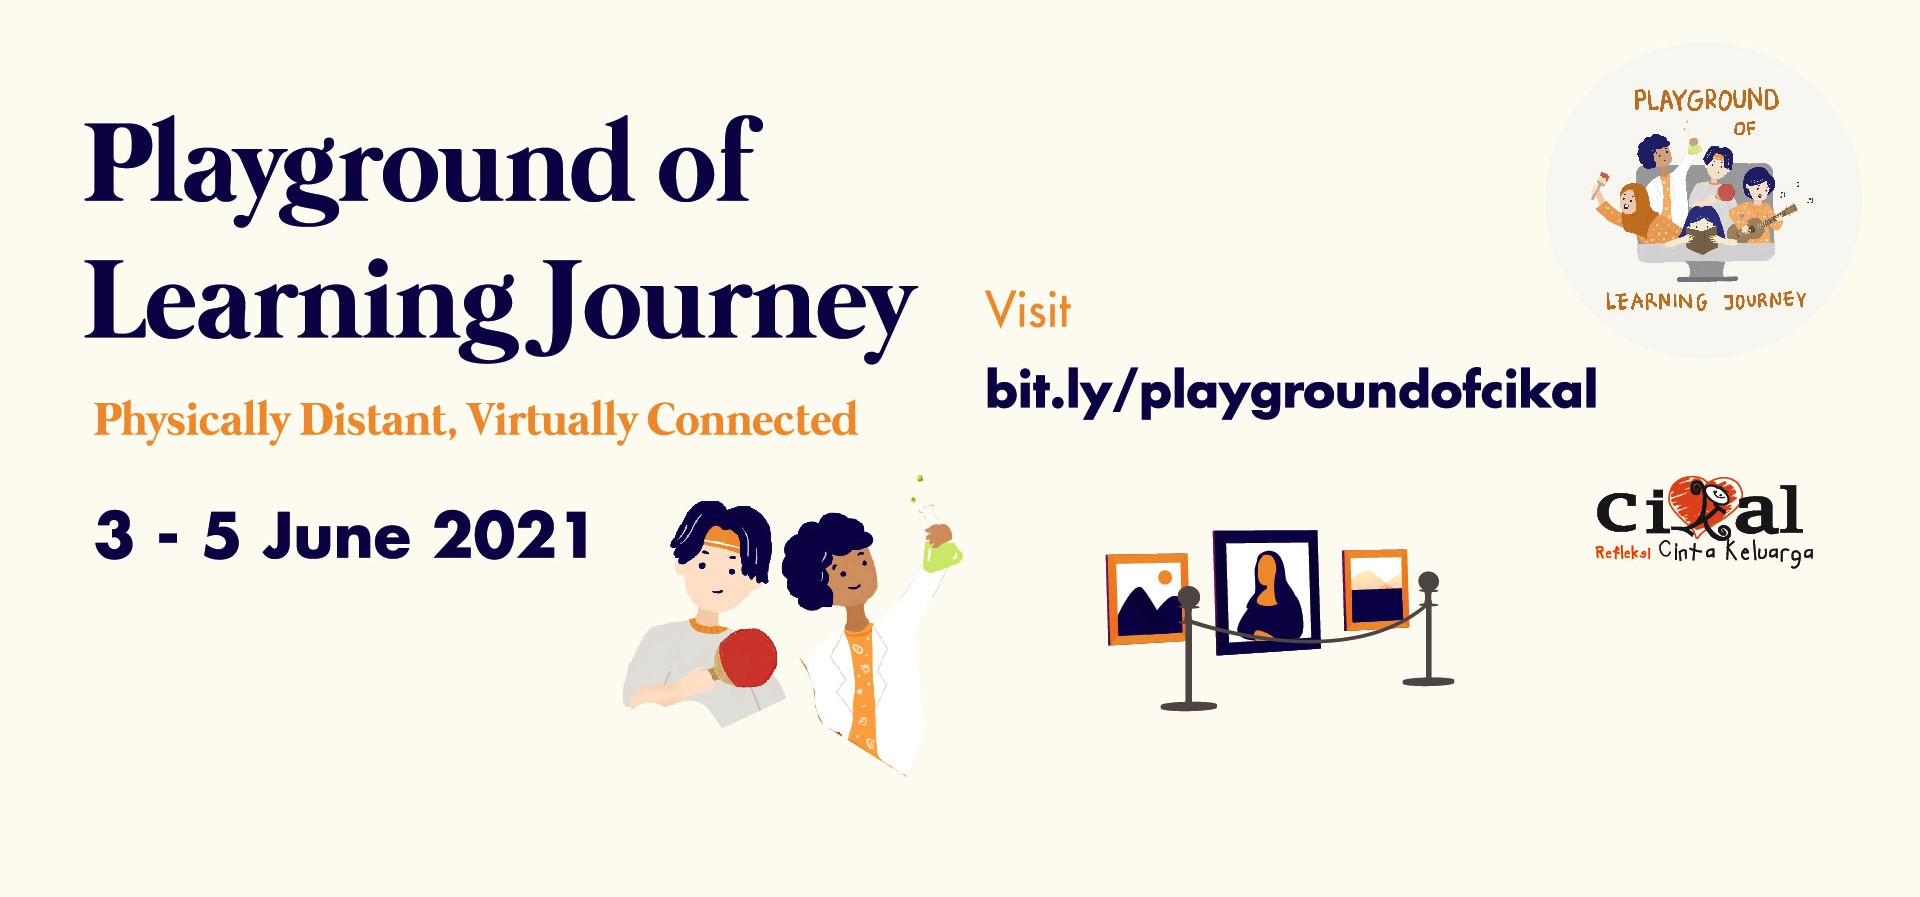 PLAYGROUND OF LEARNING JOURNEY 2021 